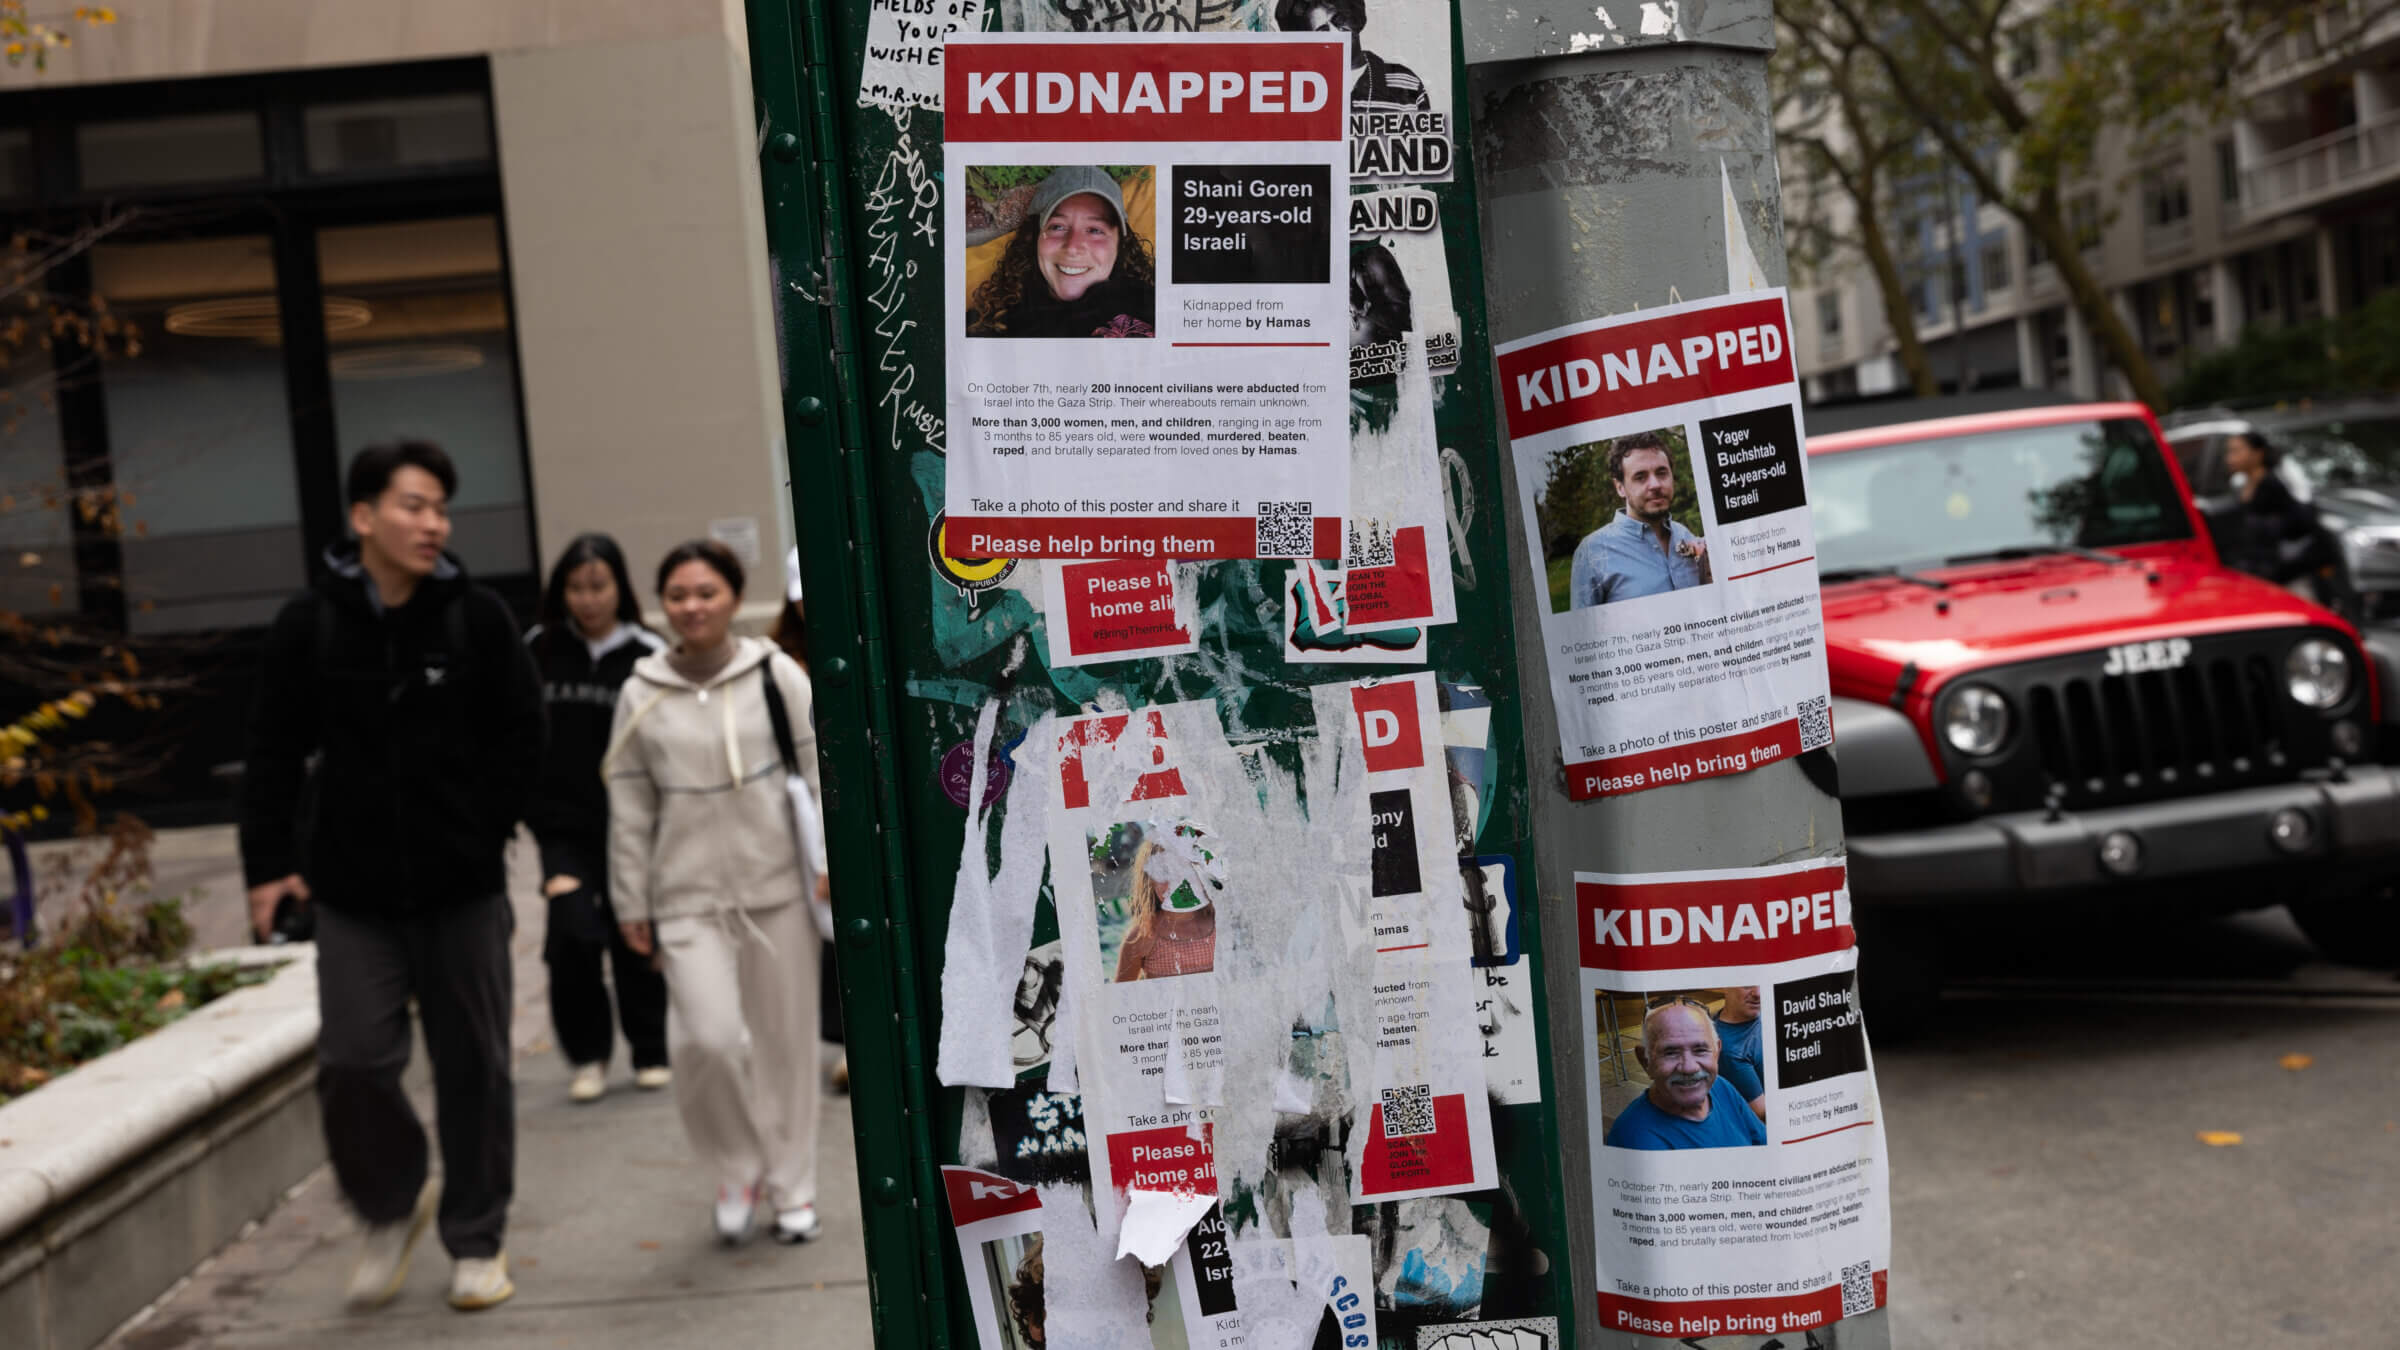 Posters of people kidnapped by Hamas in Israeli are displayed on a pole outside of New York University. New rules at some colleges would prohibit posting such posters directly on school property.